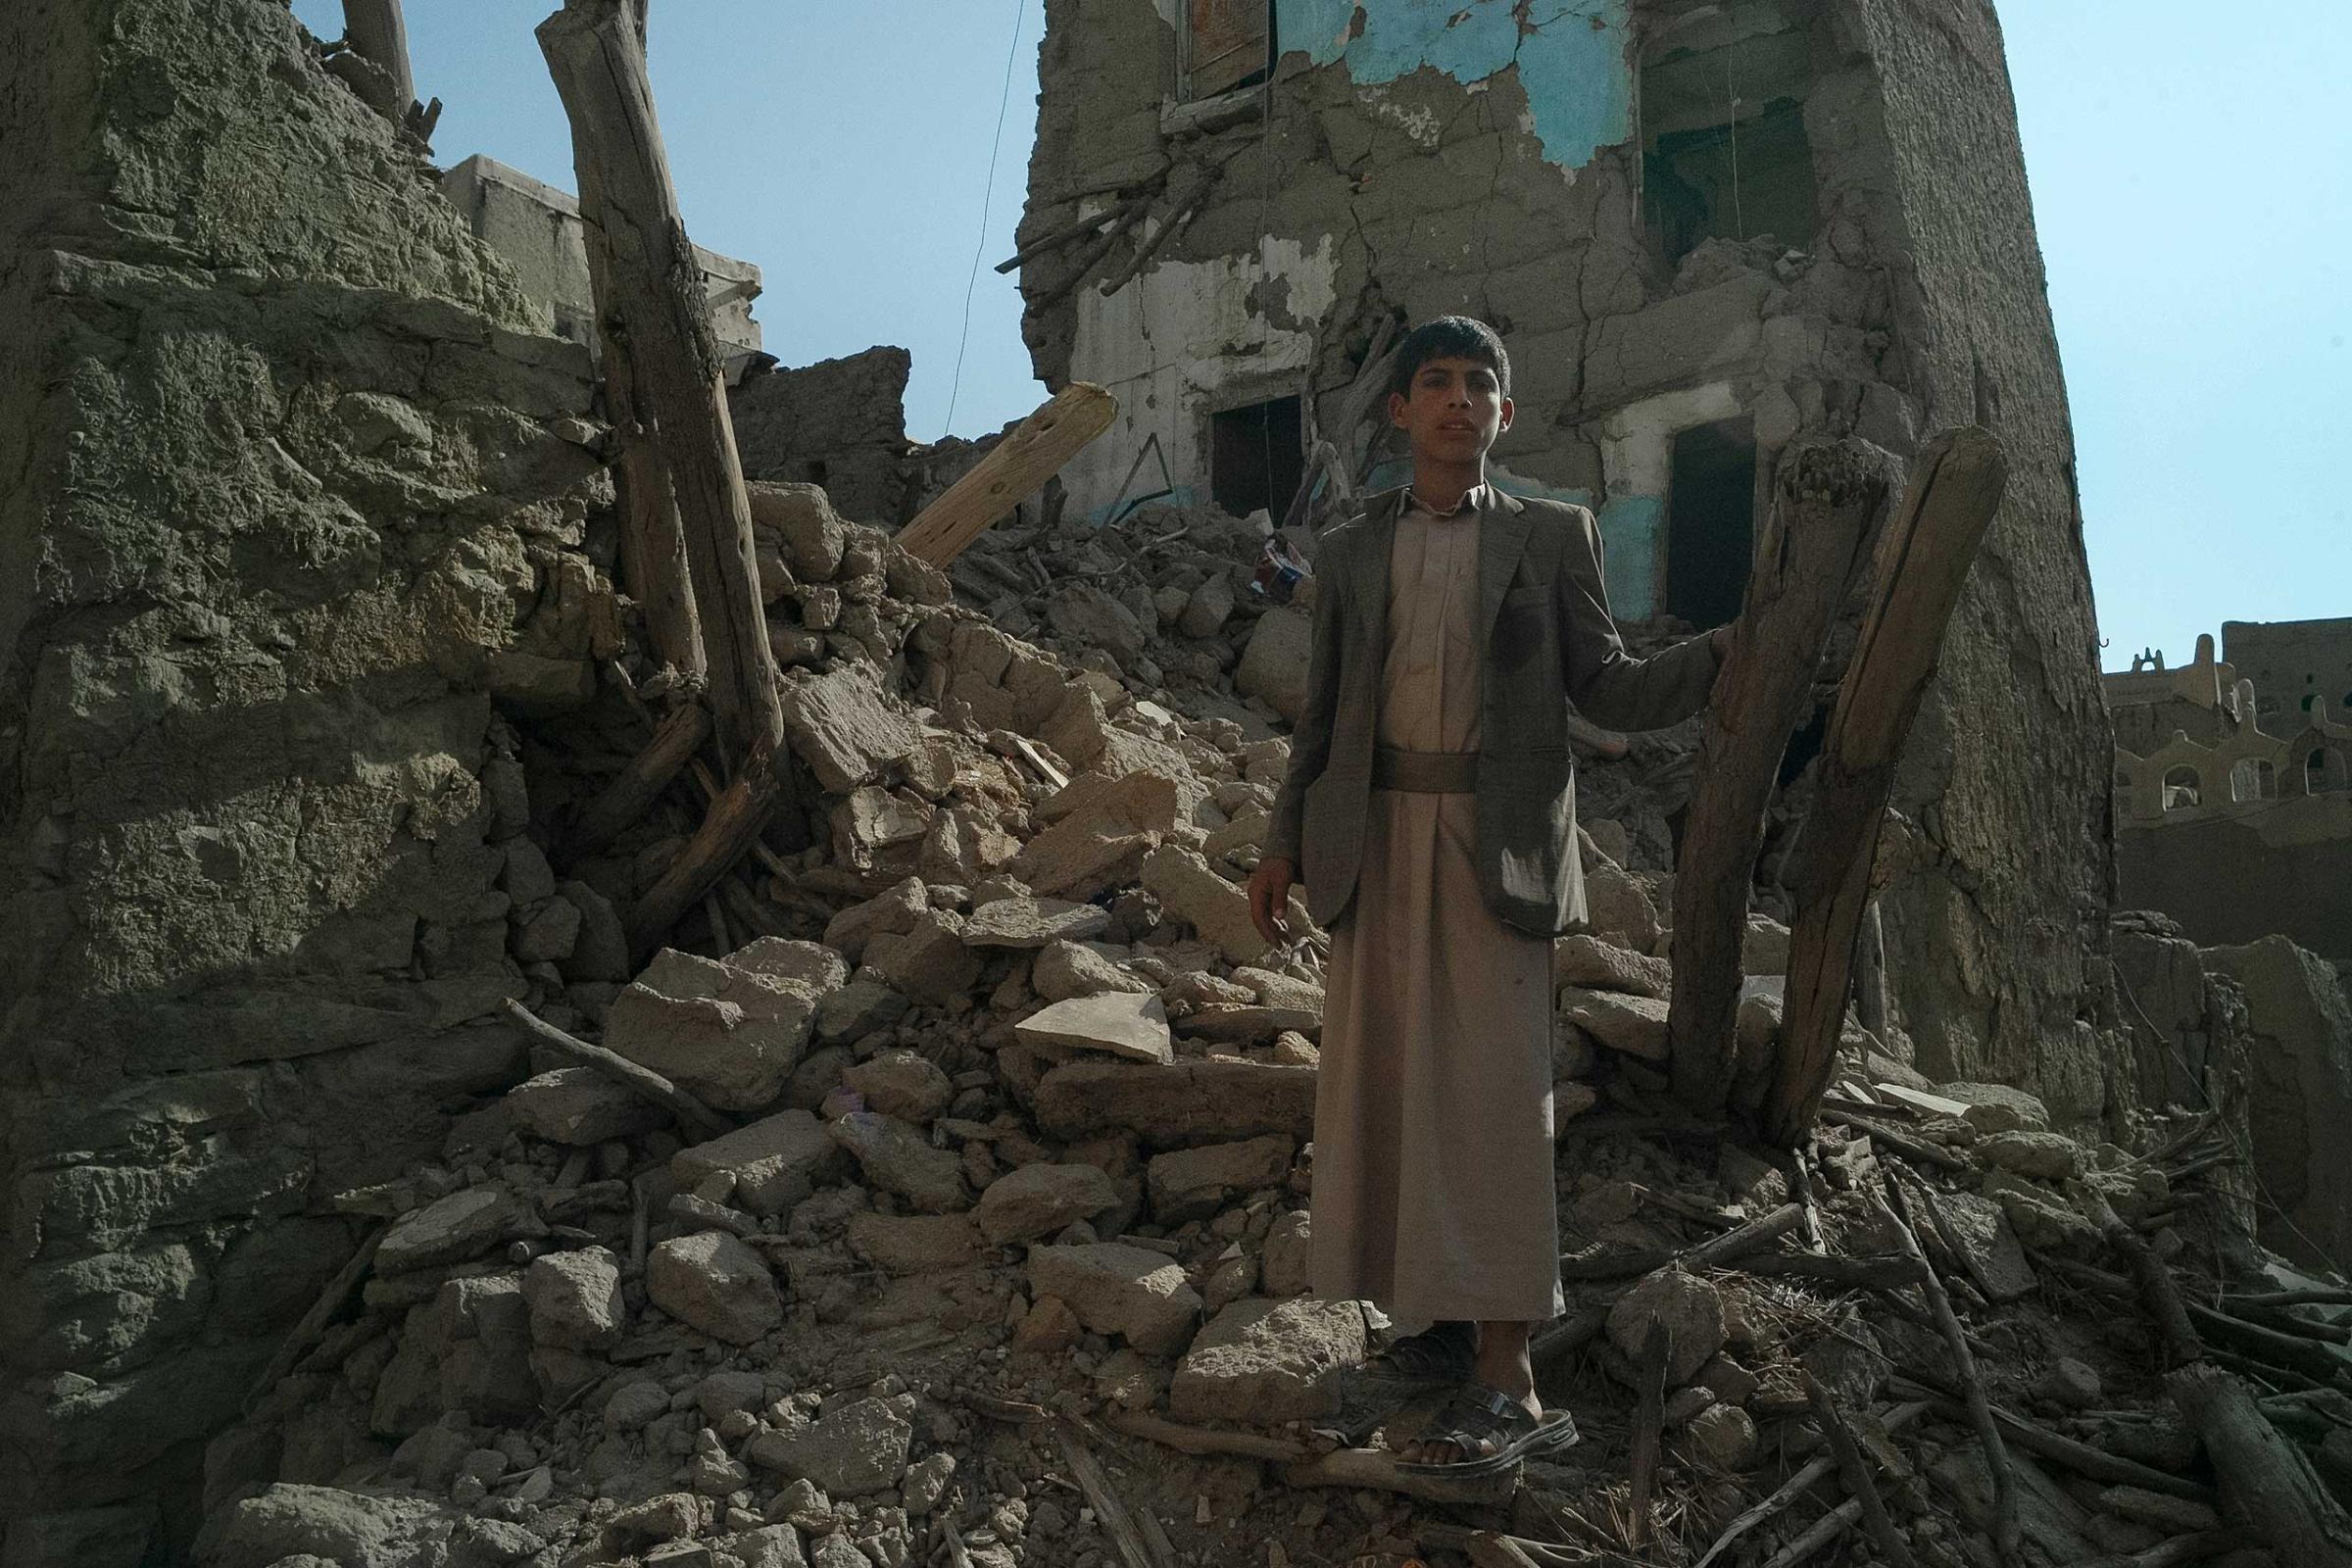 Abdul Bassat, 12, stands at the place where the house of his aunt used to be. His neighbourhood of mud-briks ancient buildings in Rahban, the area on the outskirts of Sa’dah city was destroyed by several Saudi-led airstrikes in May, 2015. Sa’dah province is the stronghold of the Houthi insurgency movement in Yemen, which emerged here in 2004. In 2004-2010 it experienced six wars launched by the Ali Abdullah Saleh government against the Houthi rebels. Rahban area, as well as old Sa’dah city, are included on Yemen’s World Heritage Tentative List.